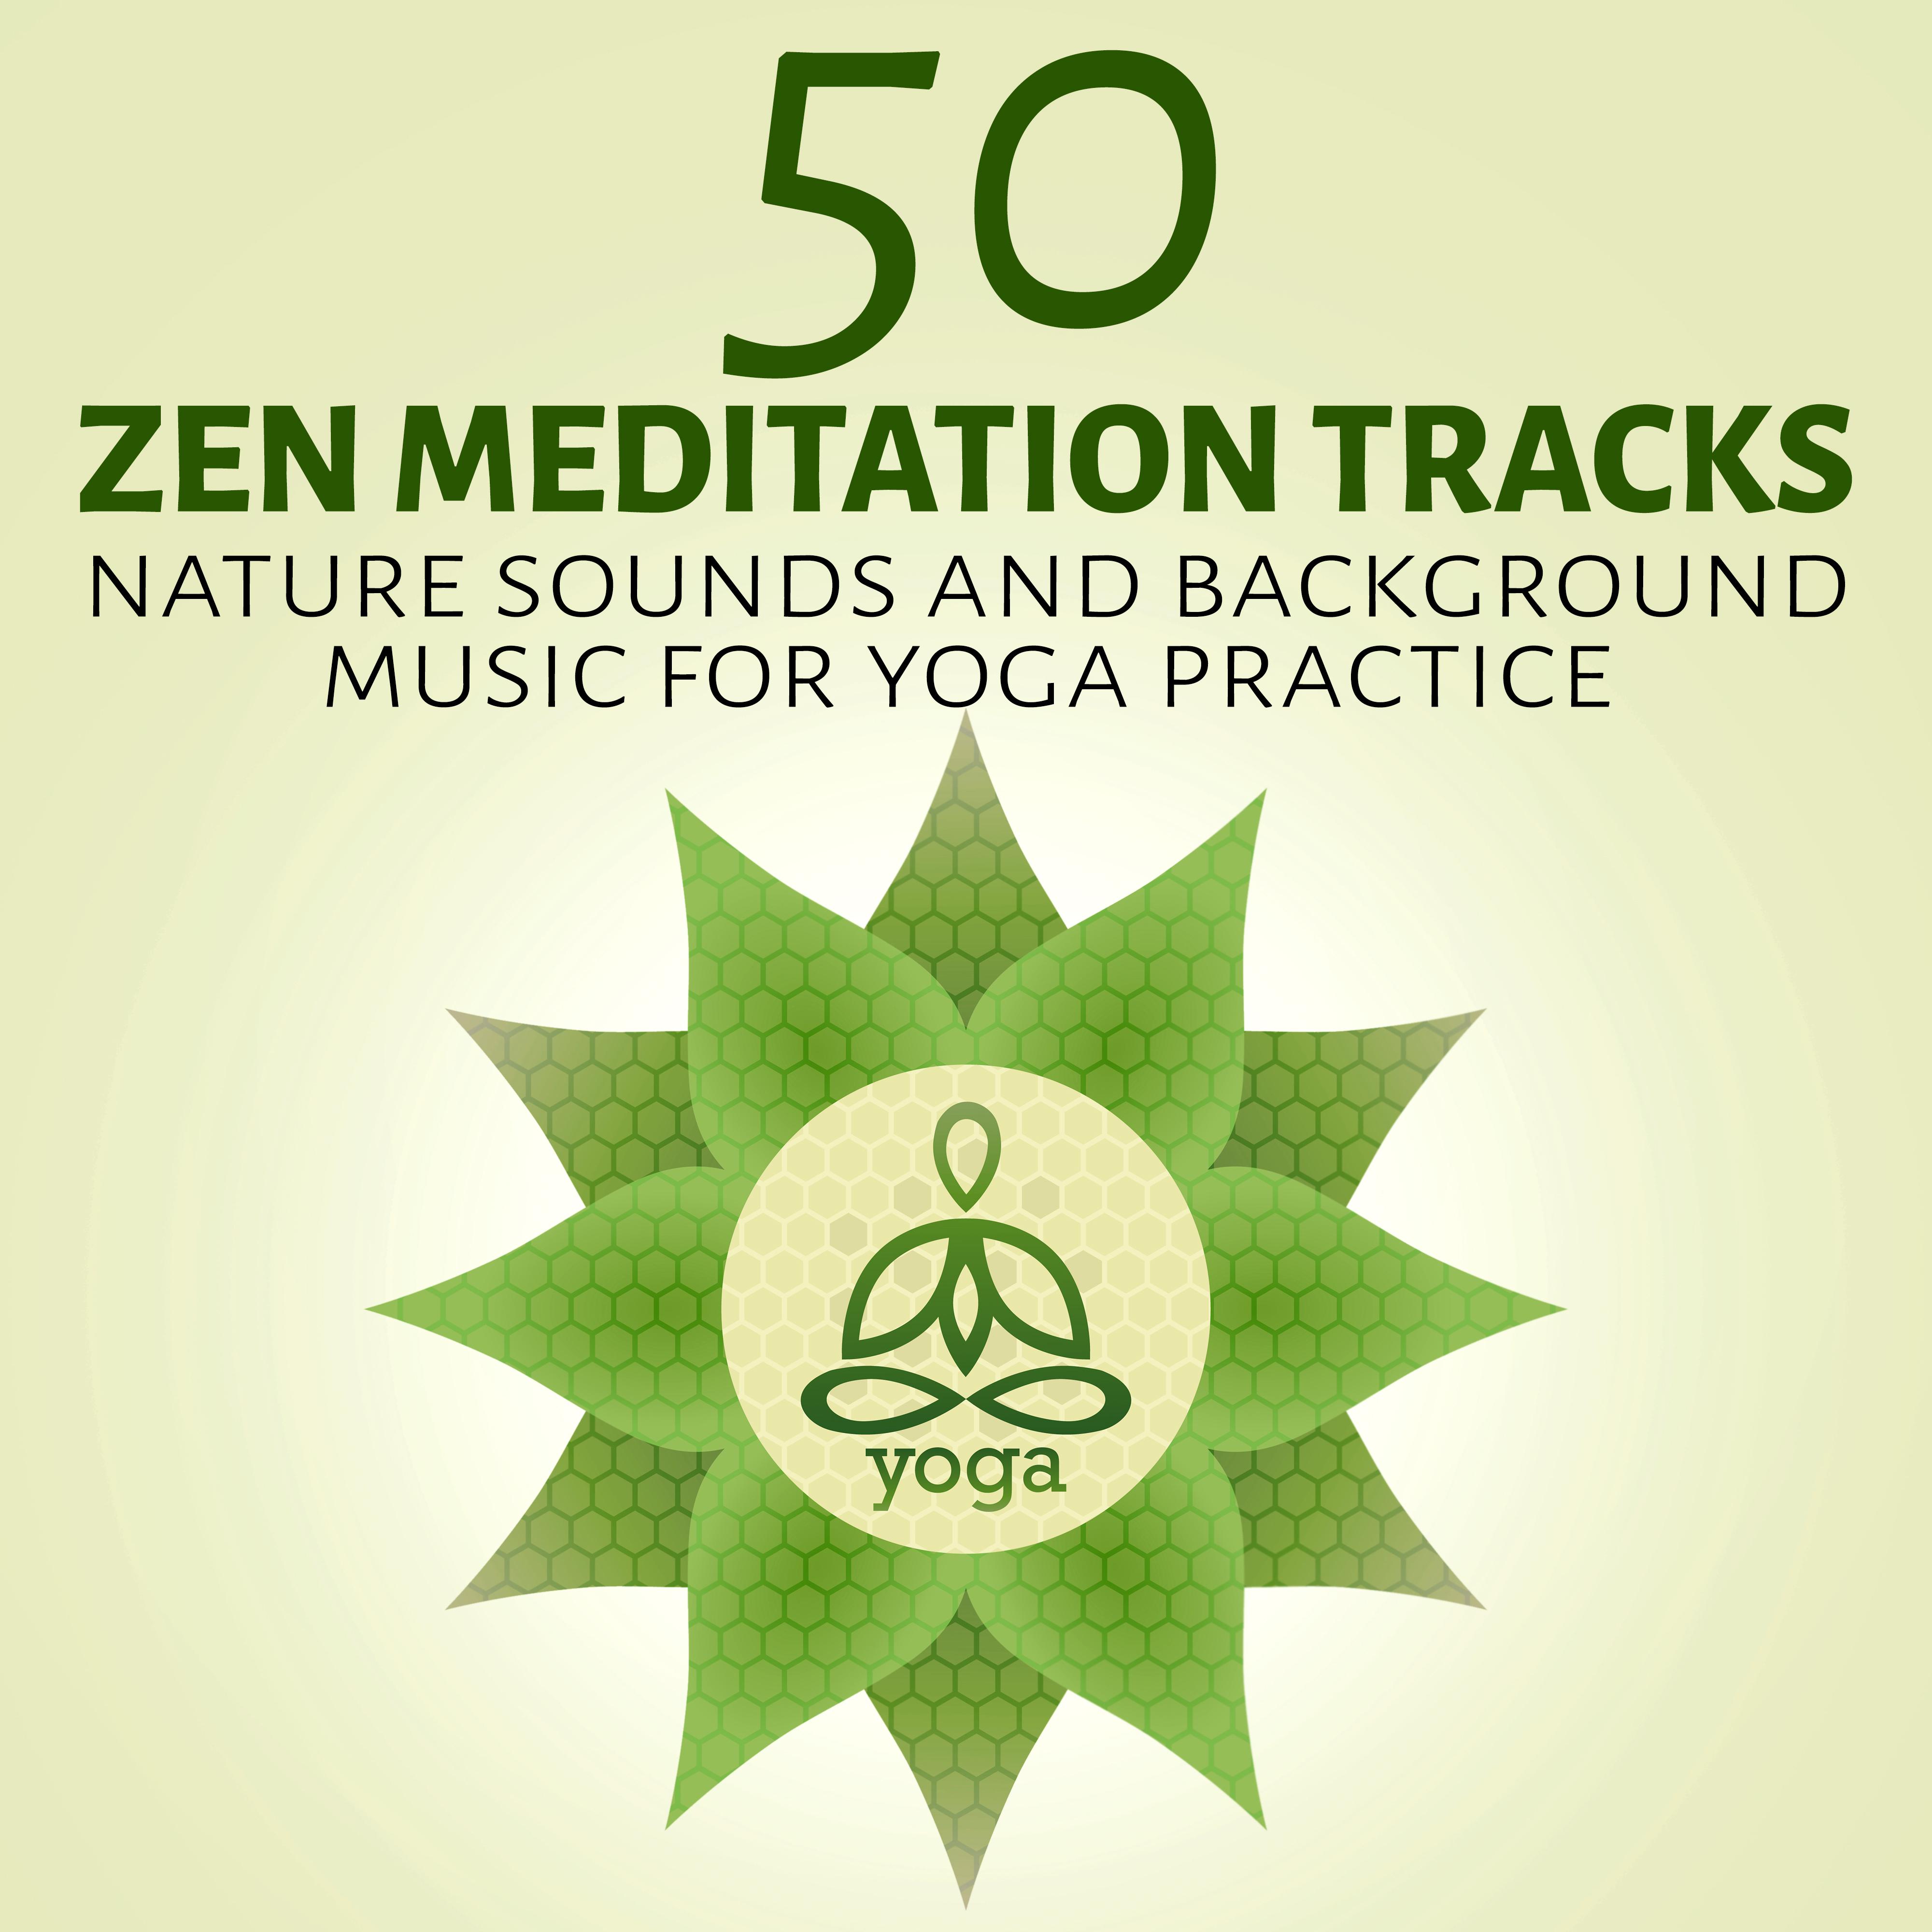 Background Music for Yoga Practice